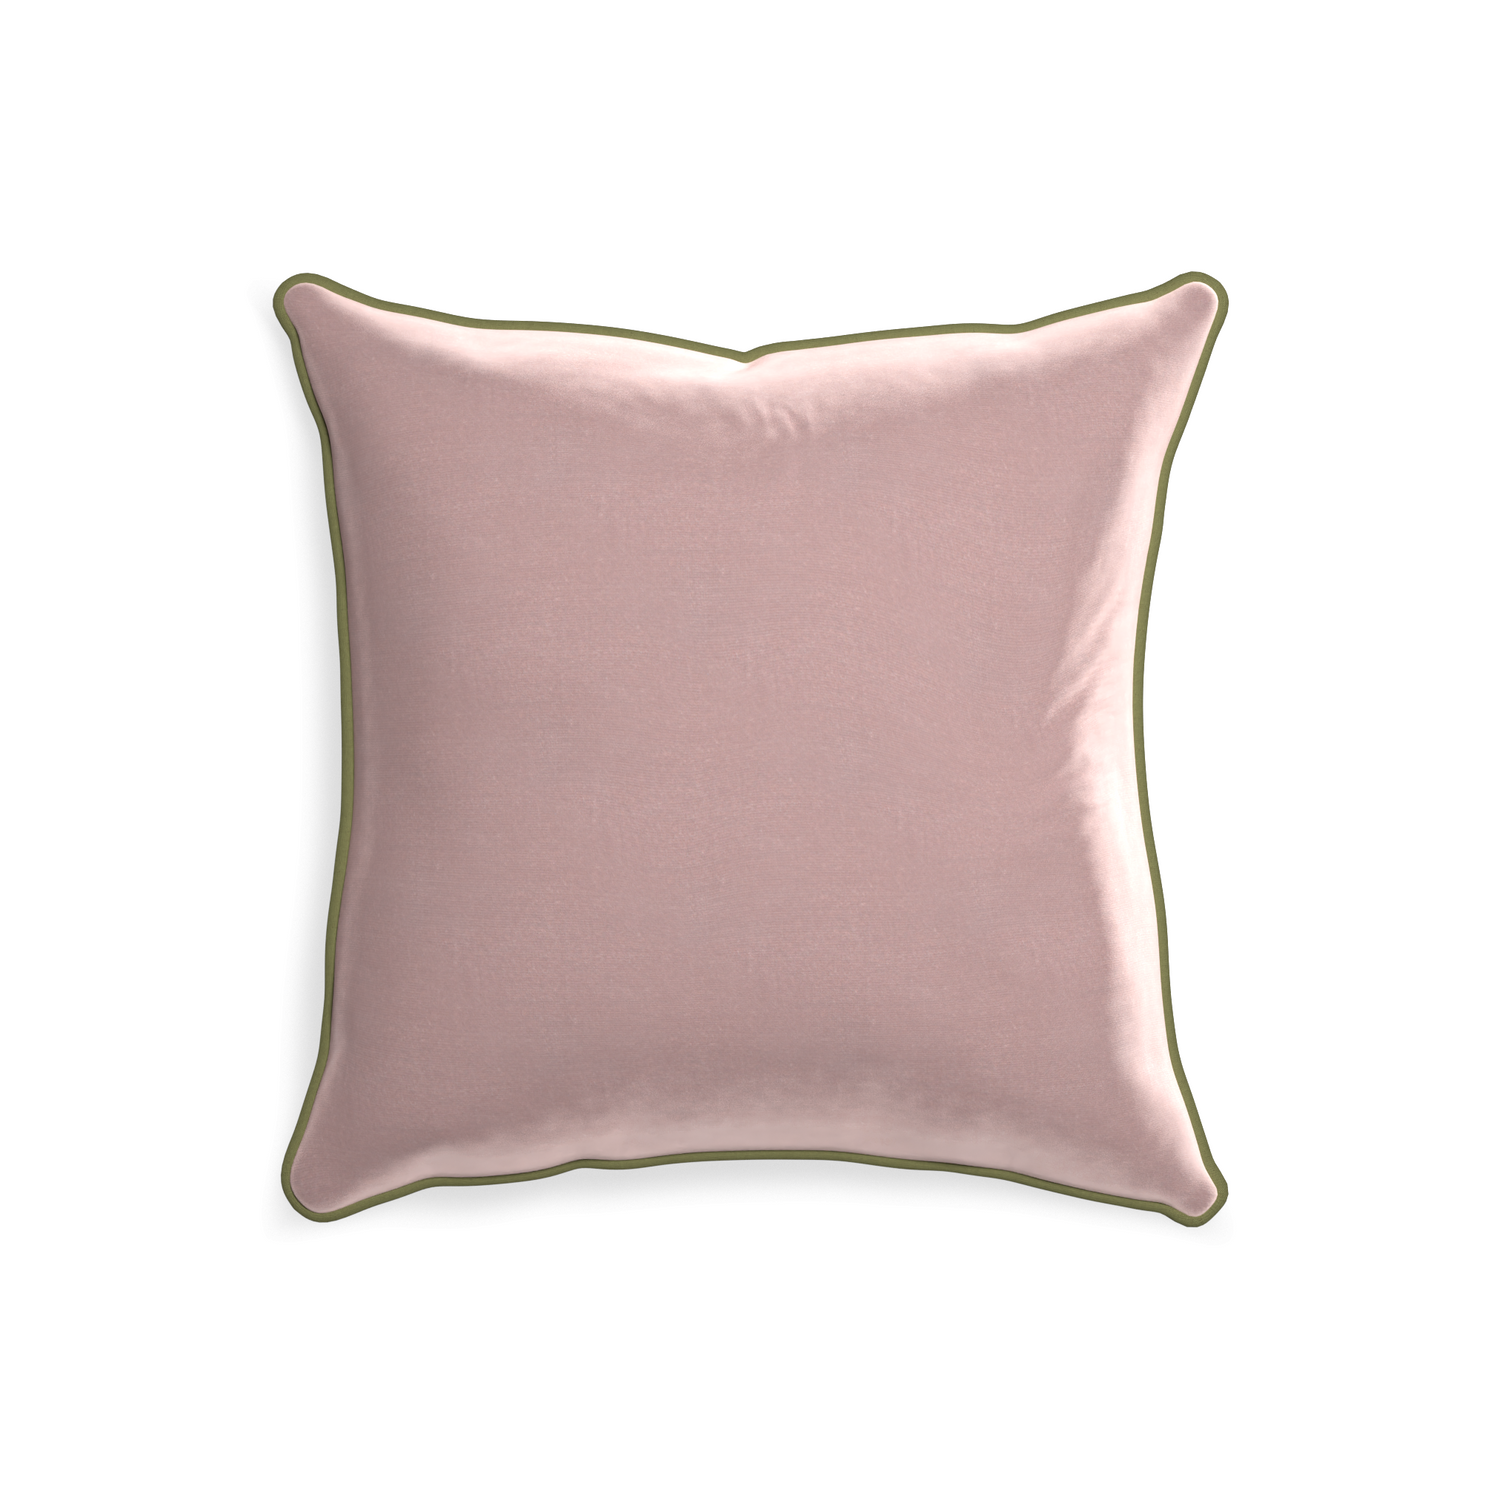 20-square mauve velvet custom pillow with moss piping on white background